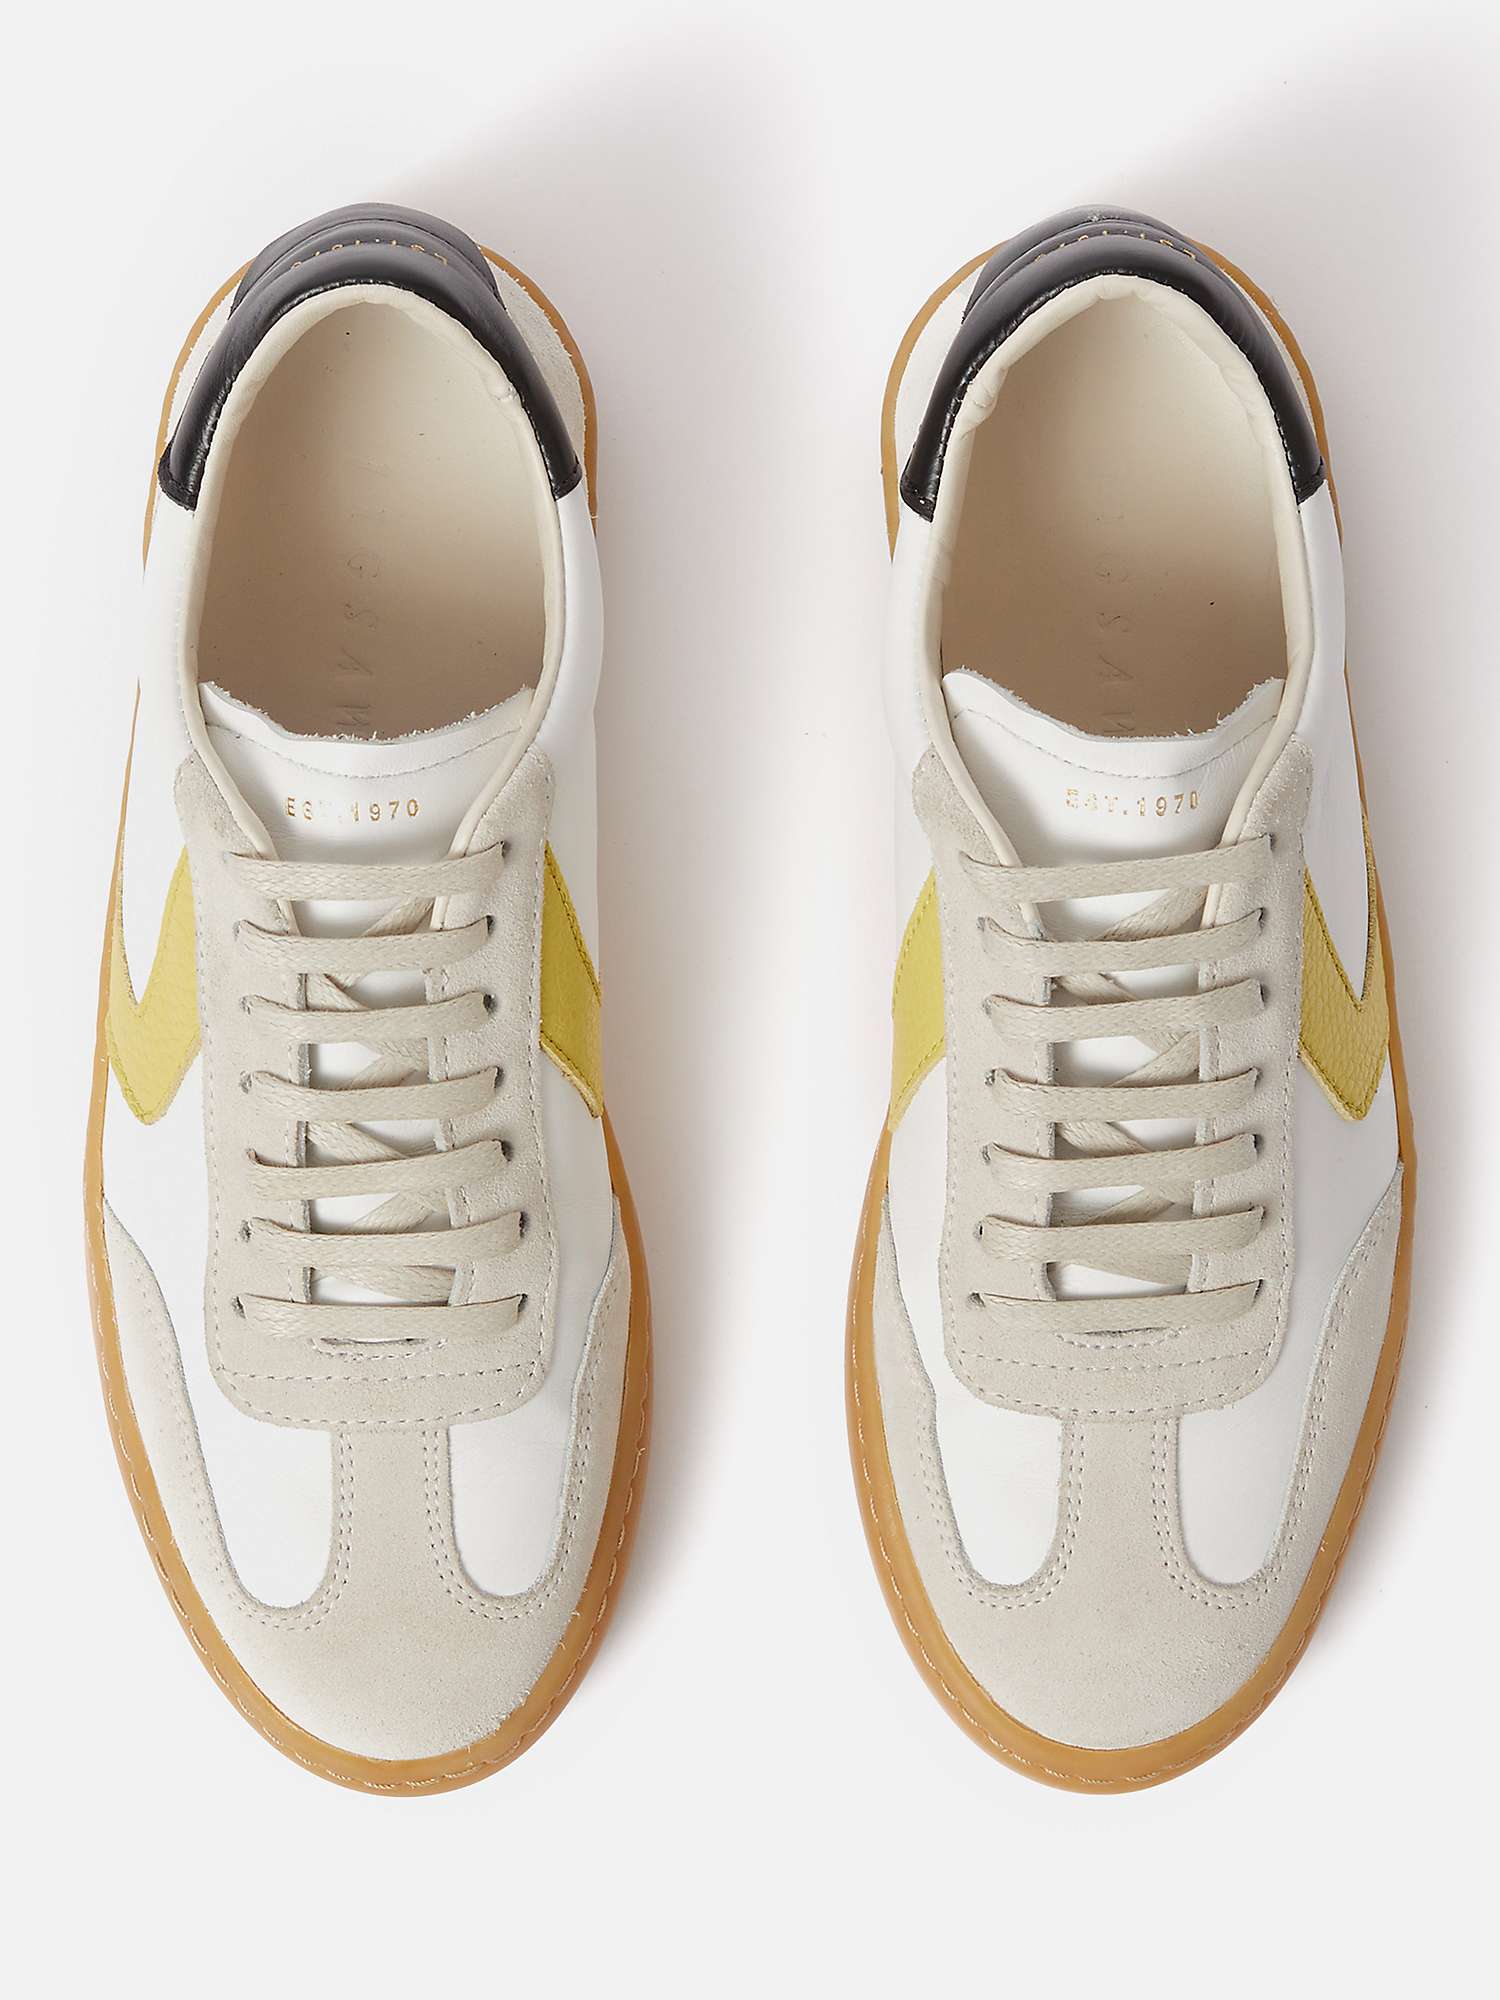 Buy Jigsaw Portland Leather Low Top Trainers, White/Multi Online at johnlewis.com